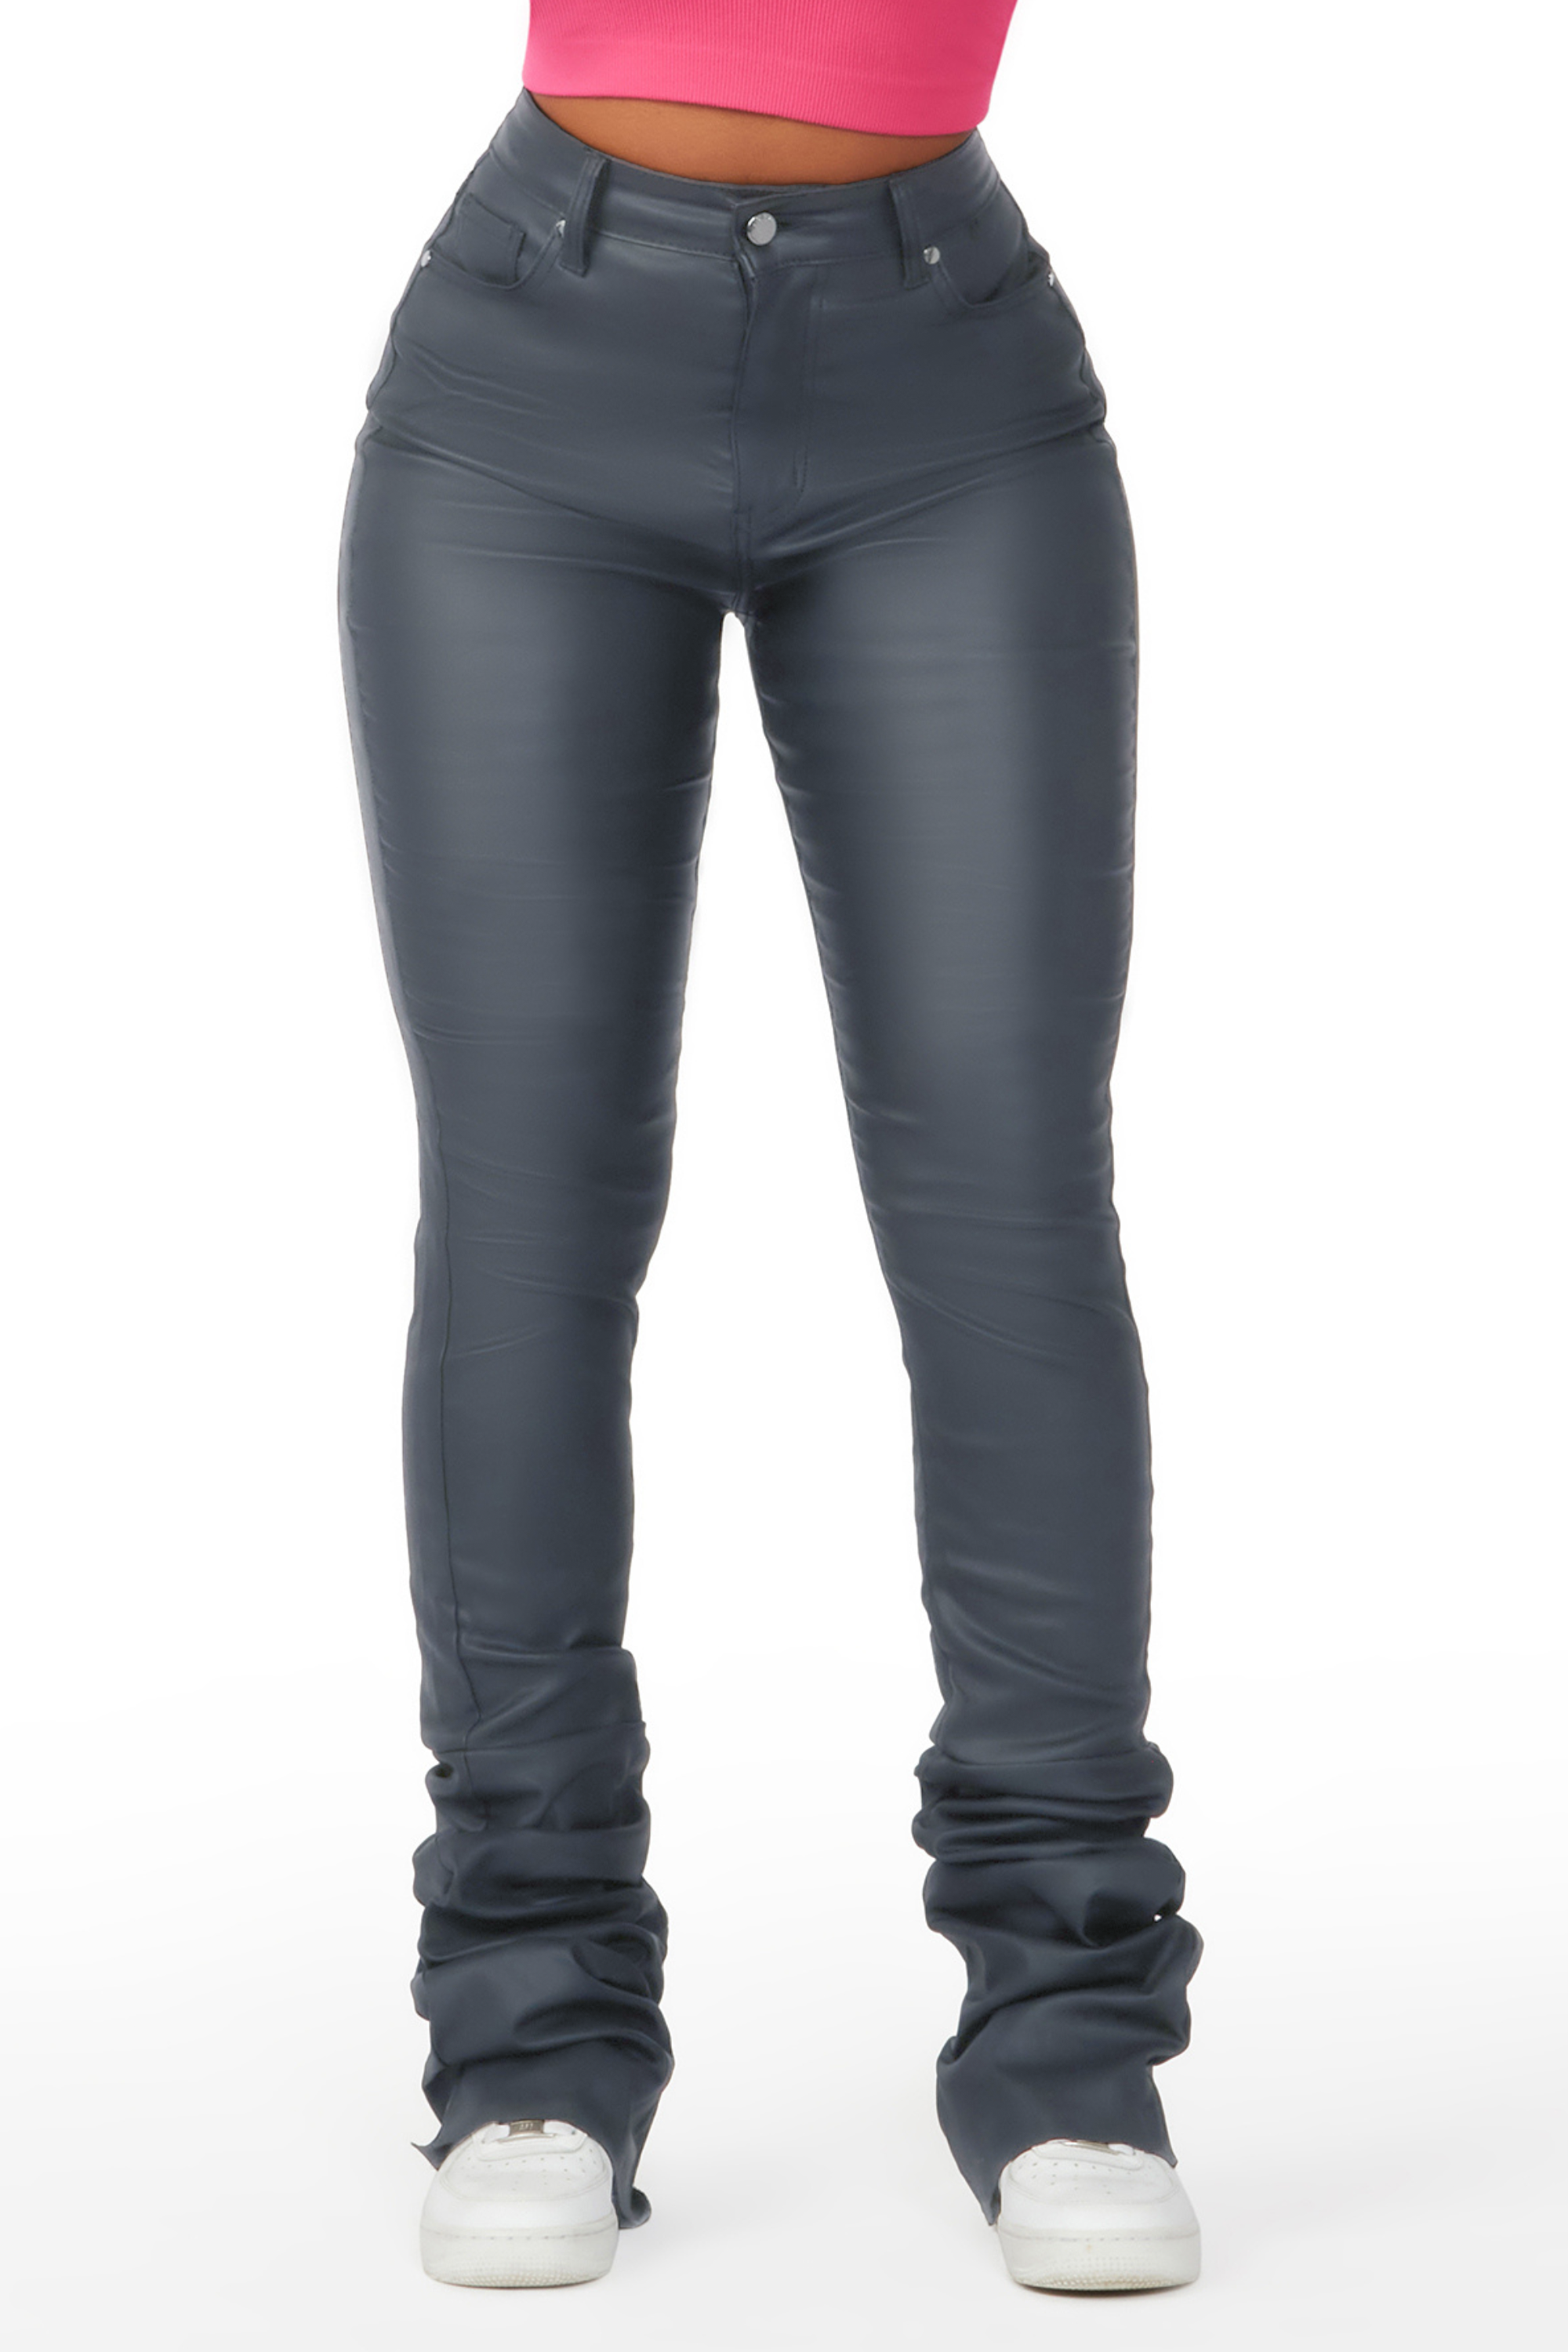 Pay Attention Dark Grey PU Super Stacked Flare Pant